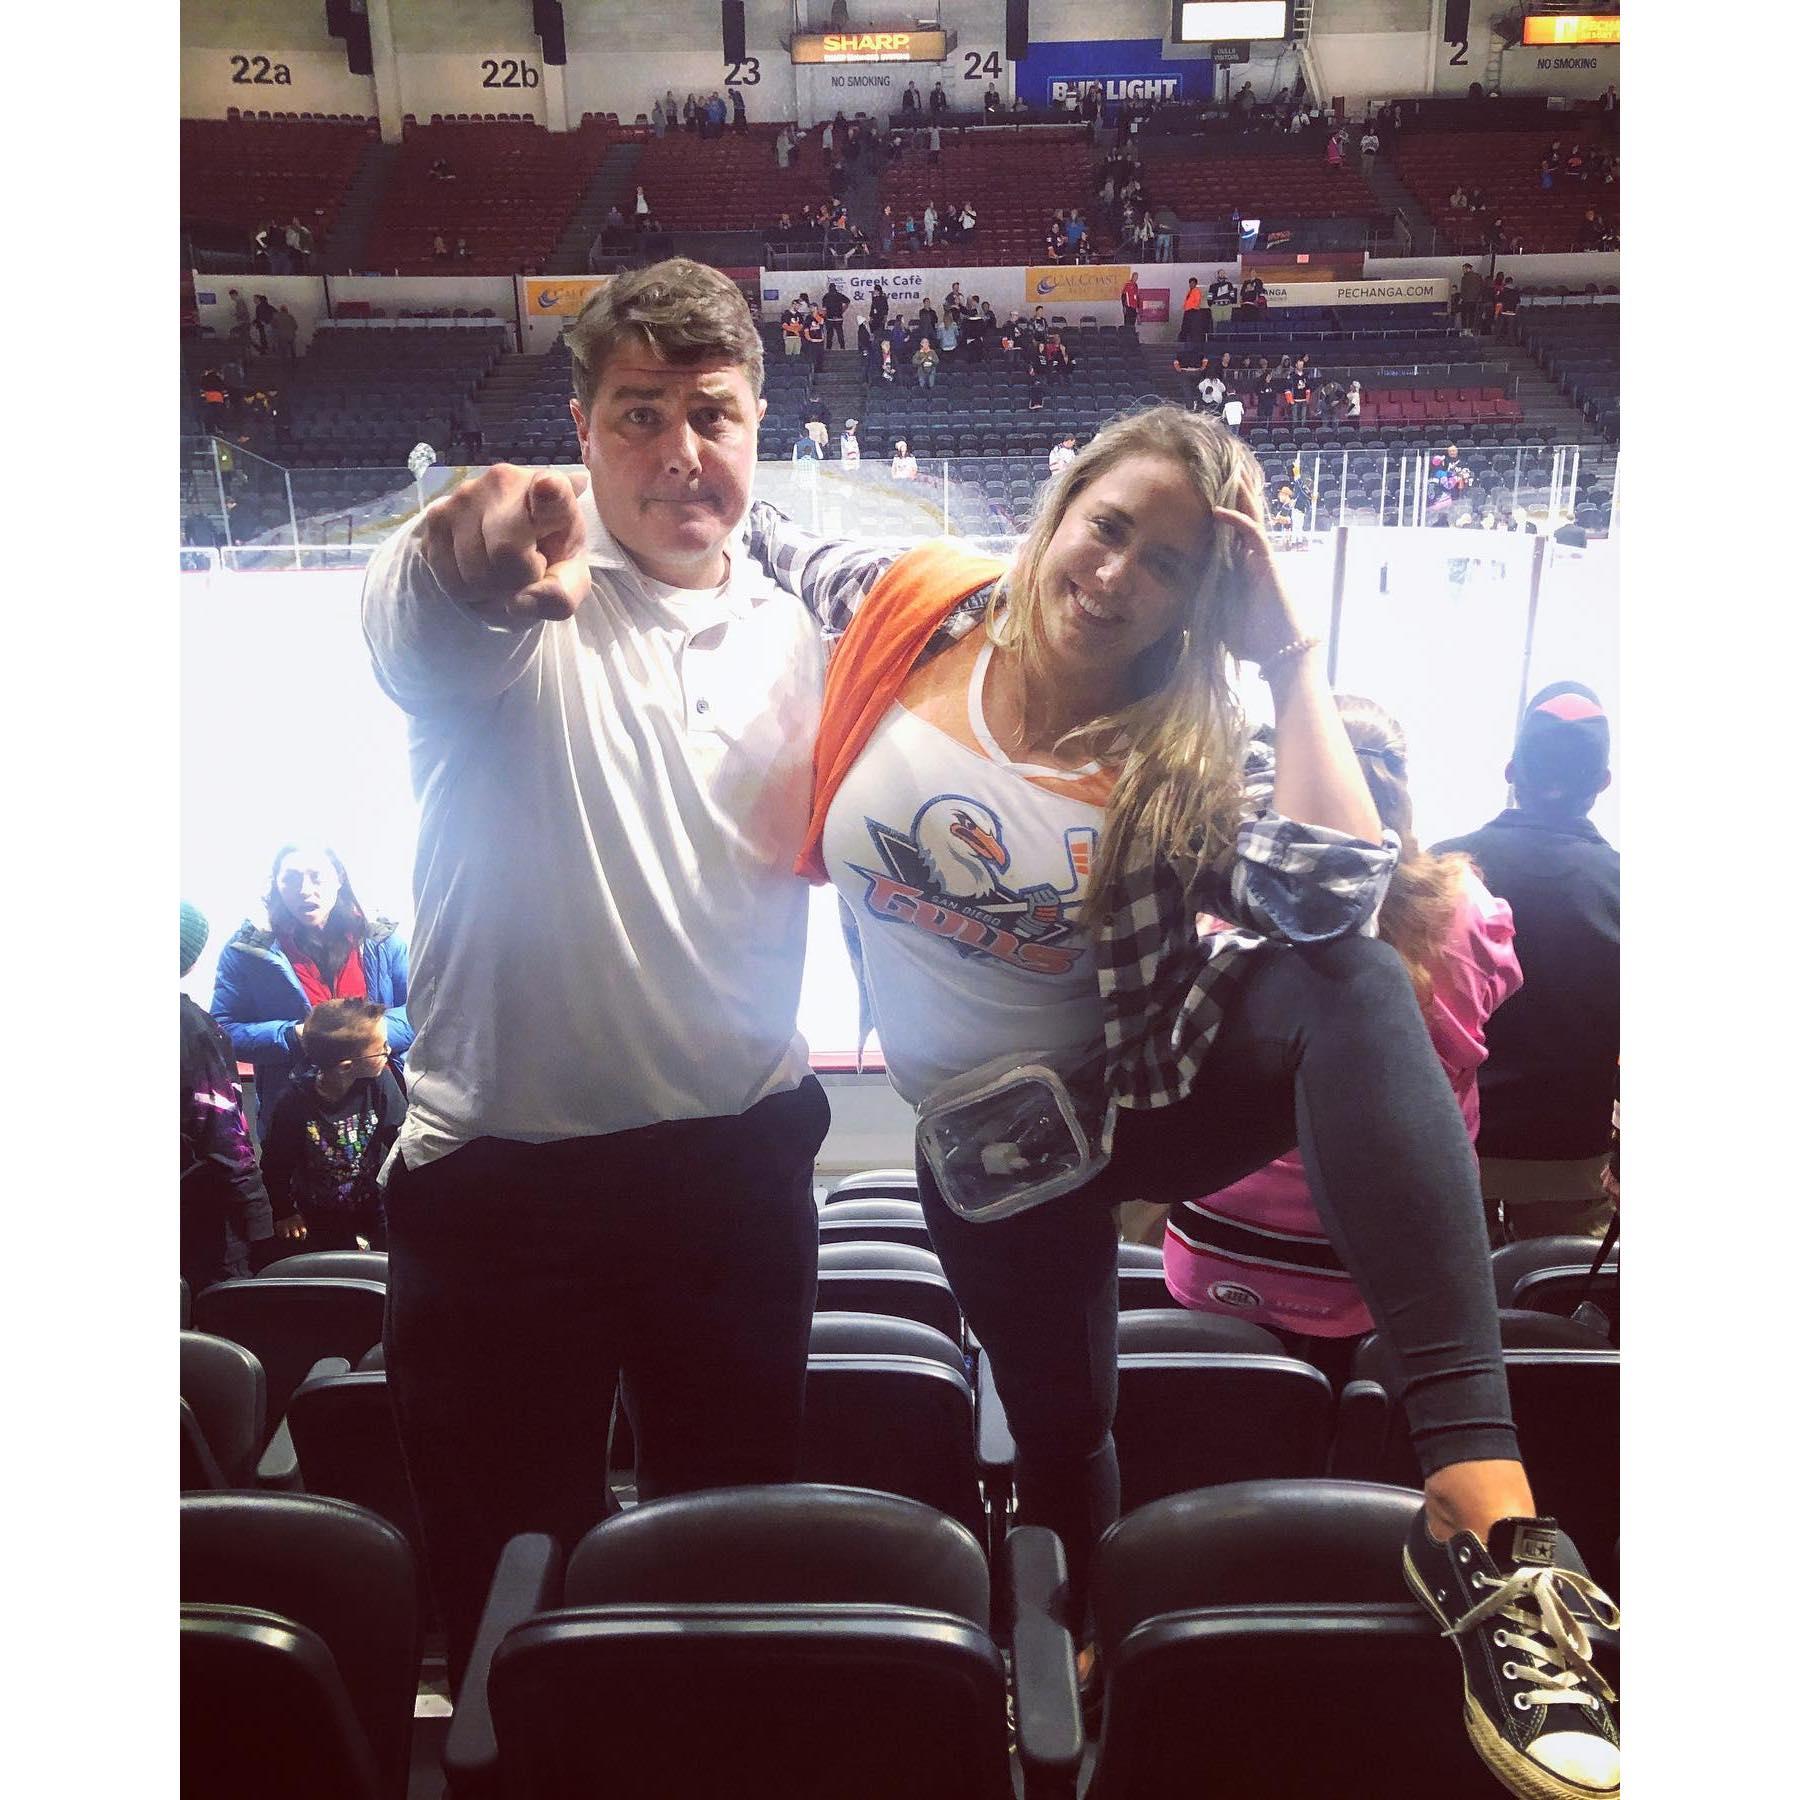 Our first gulls game. The day Max realized how much Kira loves a good plate of nachos.